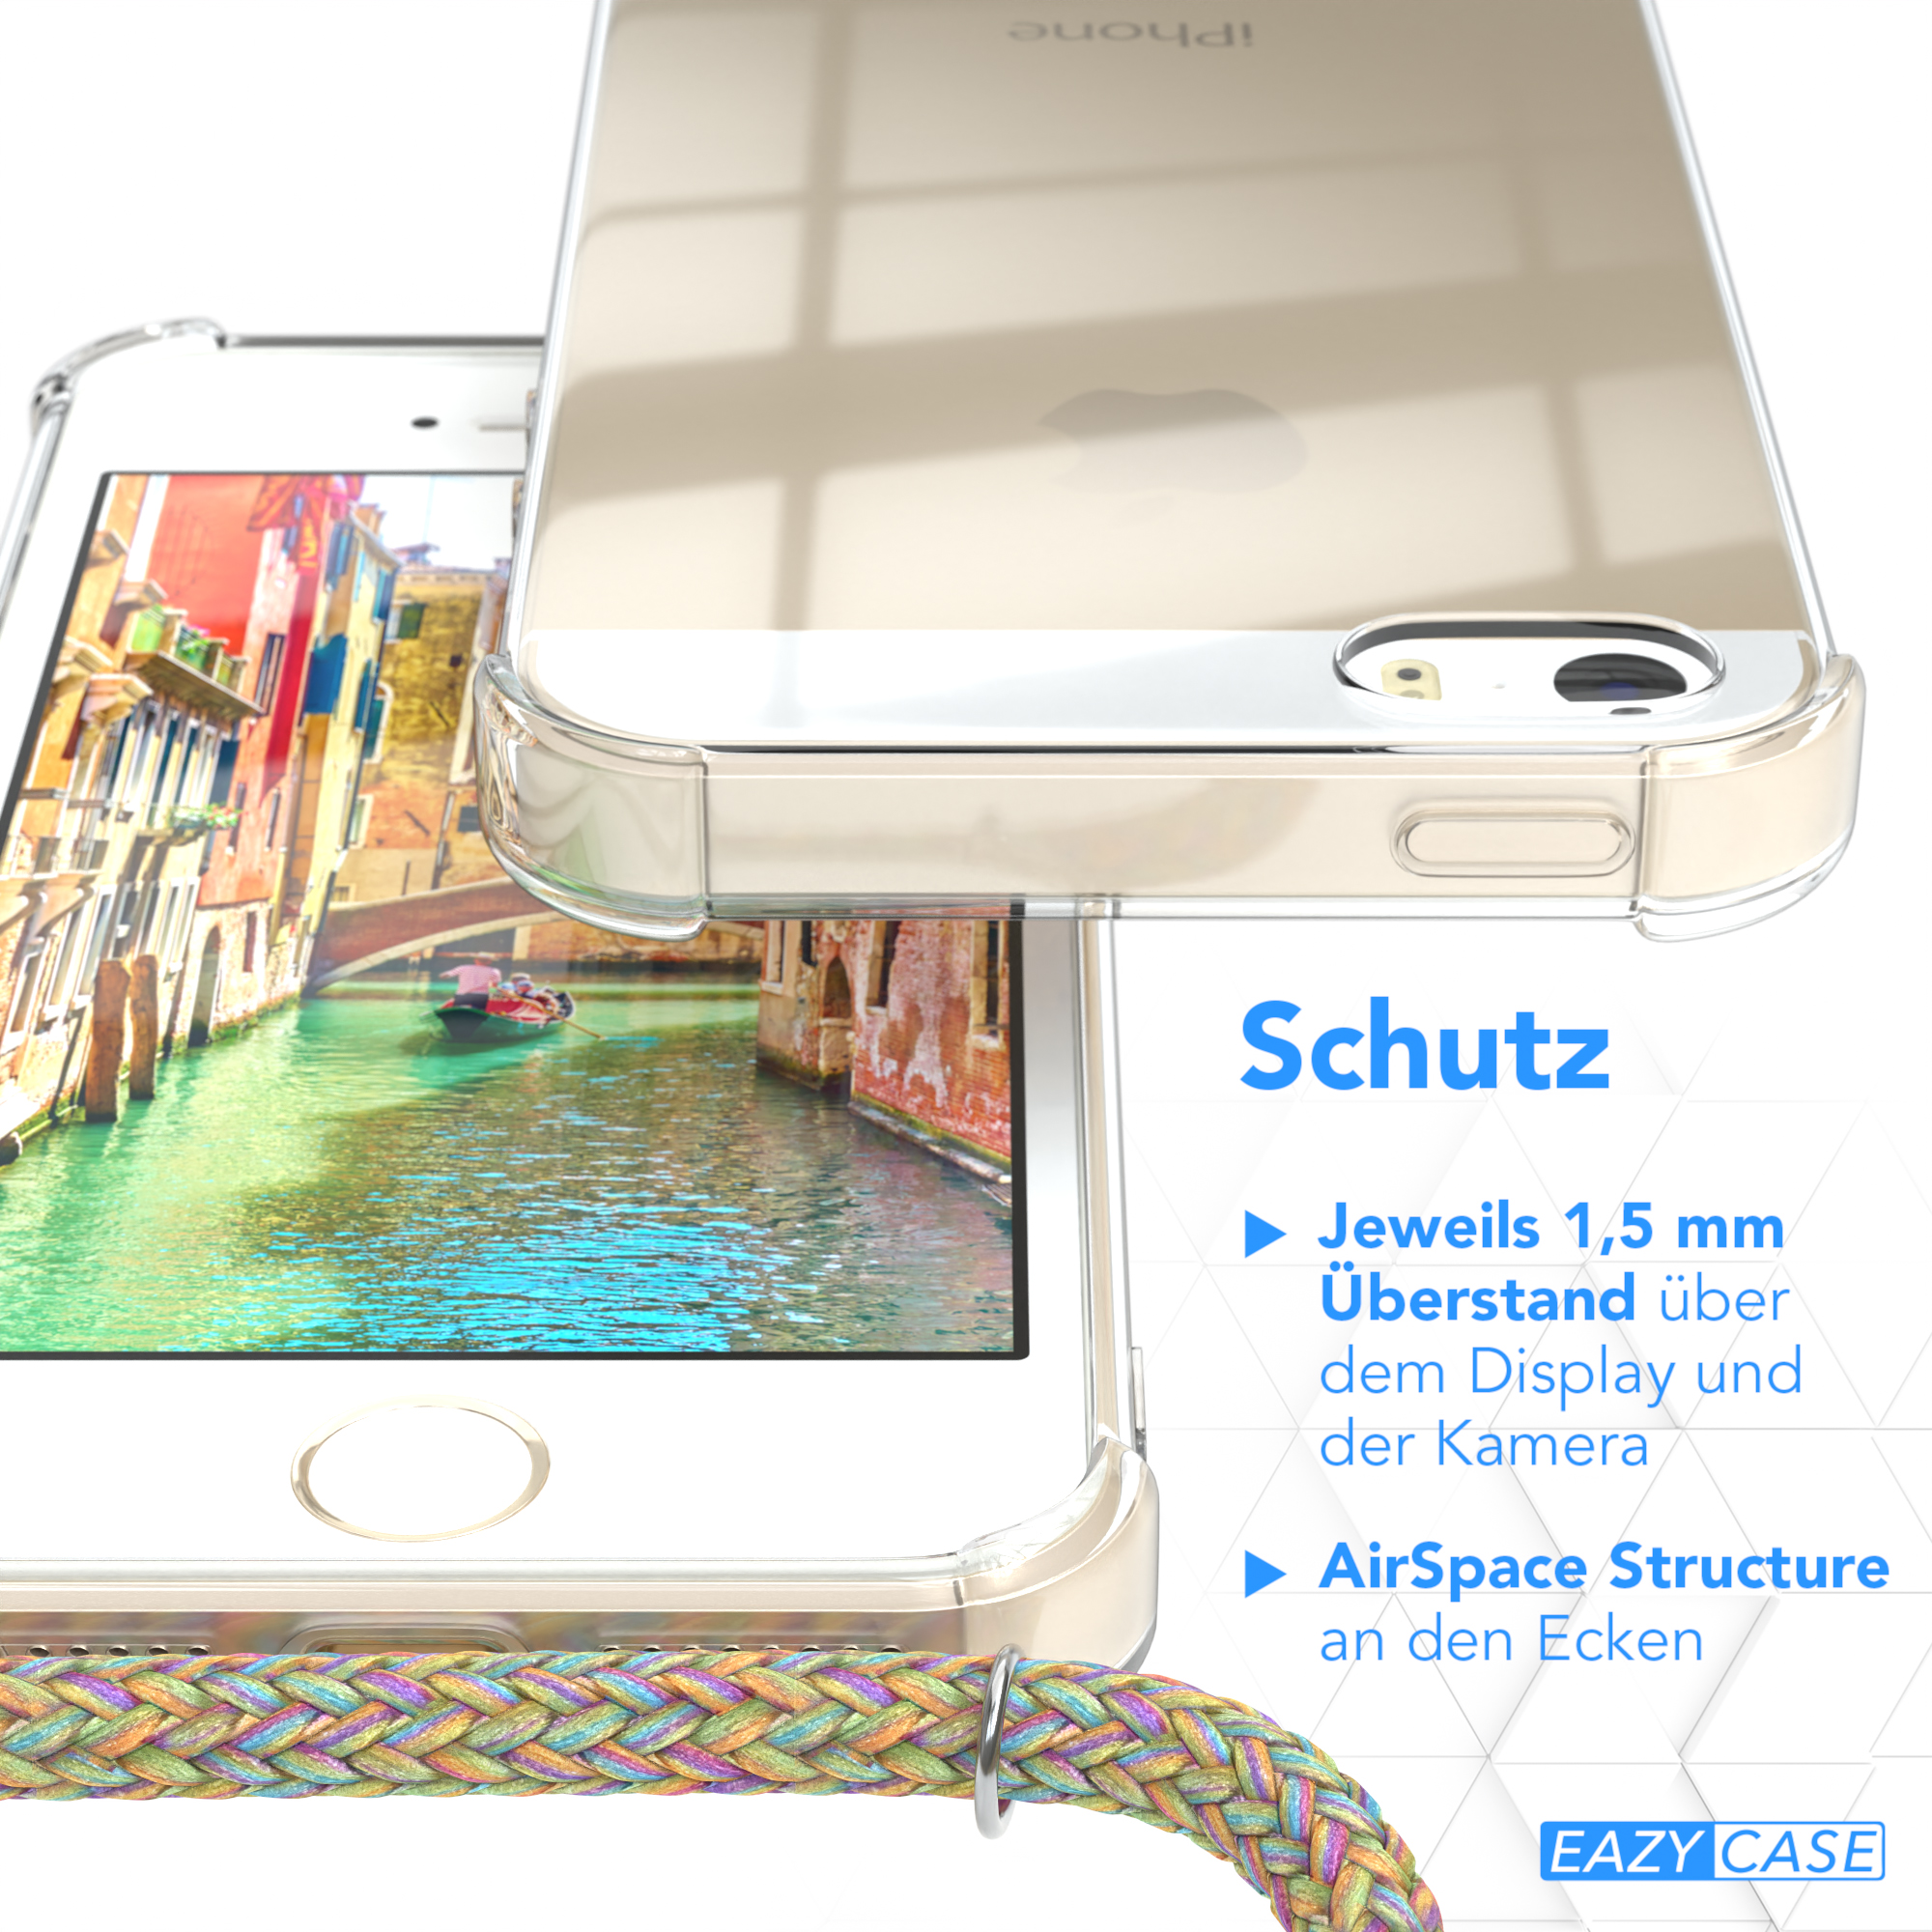 SE 2016, Umhängetasche, Clear Apple, CASE mit / Gold 5S, Umhängeband, Bunt iPhone iPhone EAZY 5 Clips / Cover